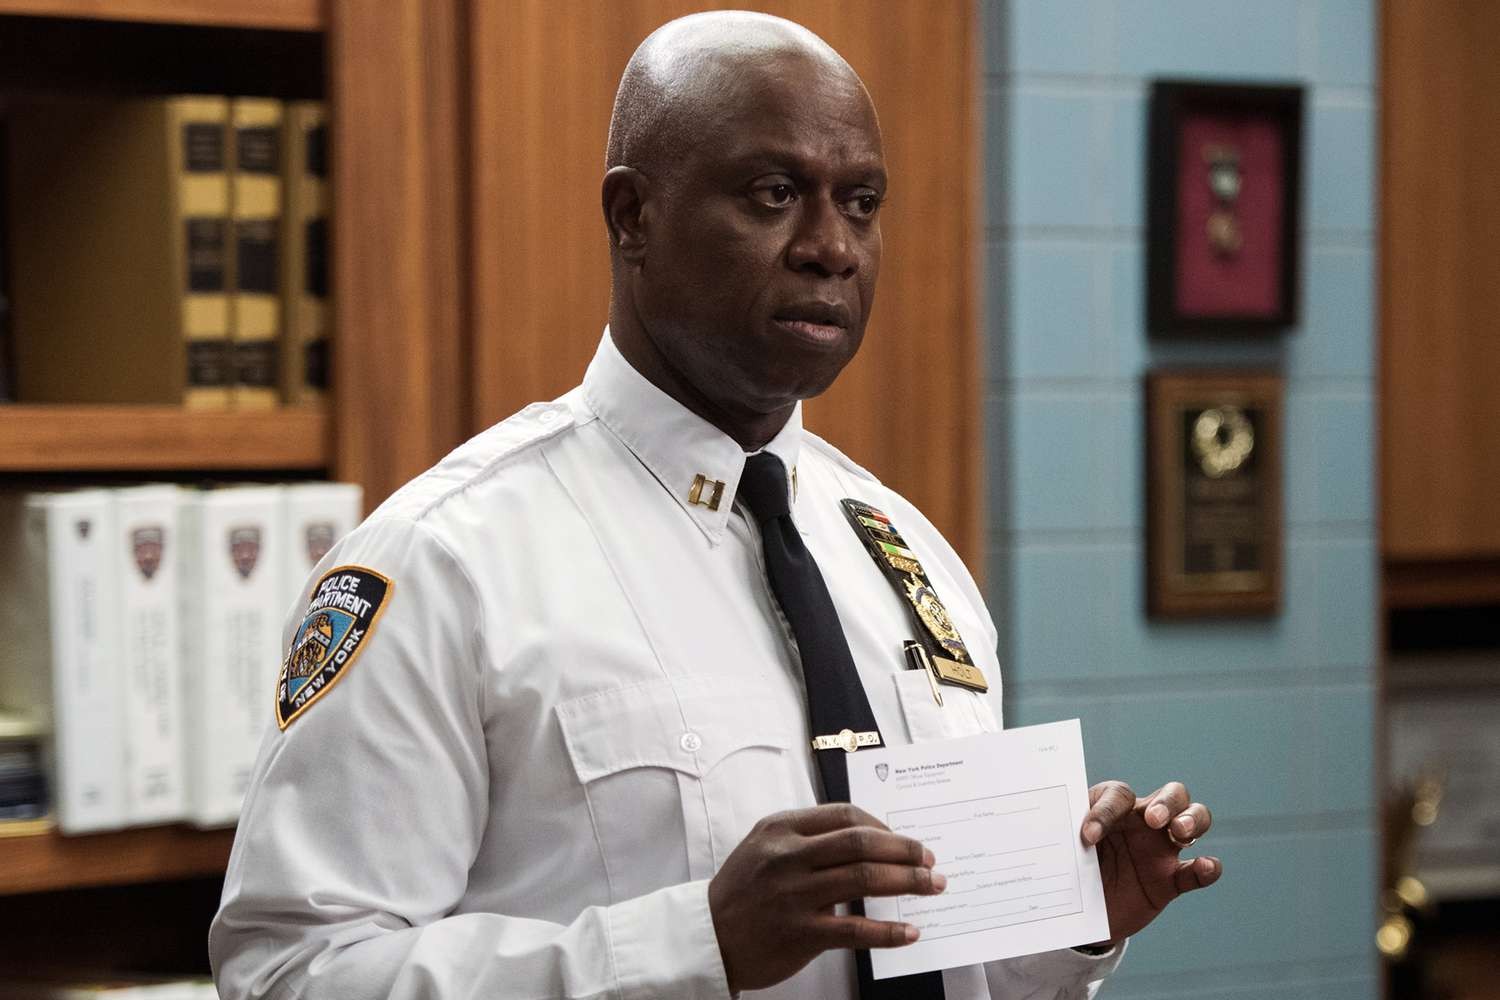 Andre Braugher played Captain Raymond Holt in Brooklyn Nine-Nine